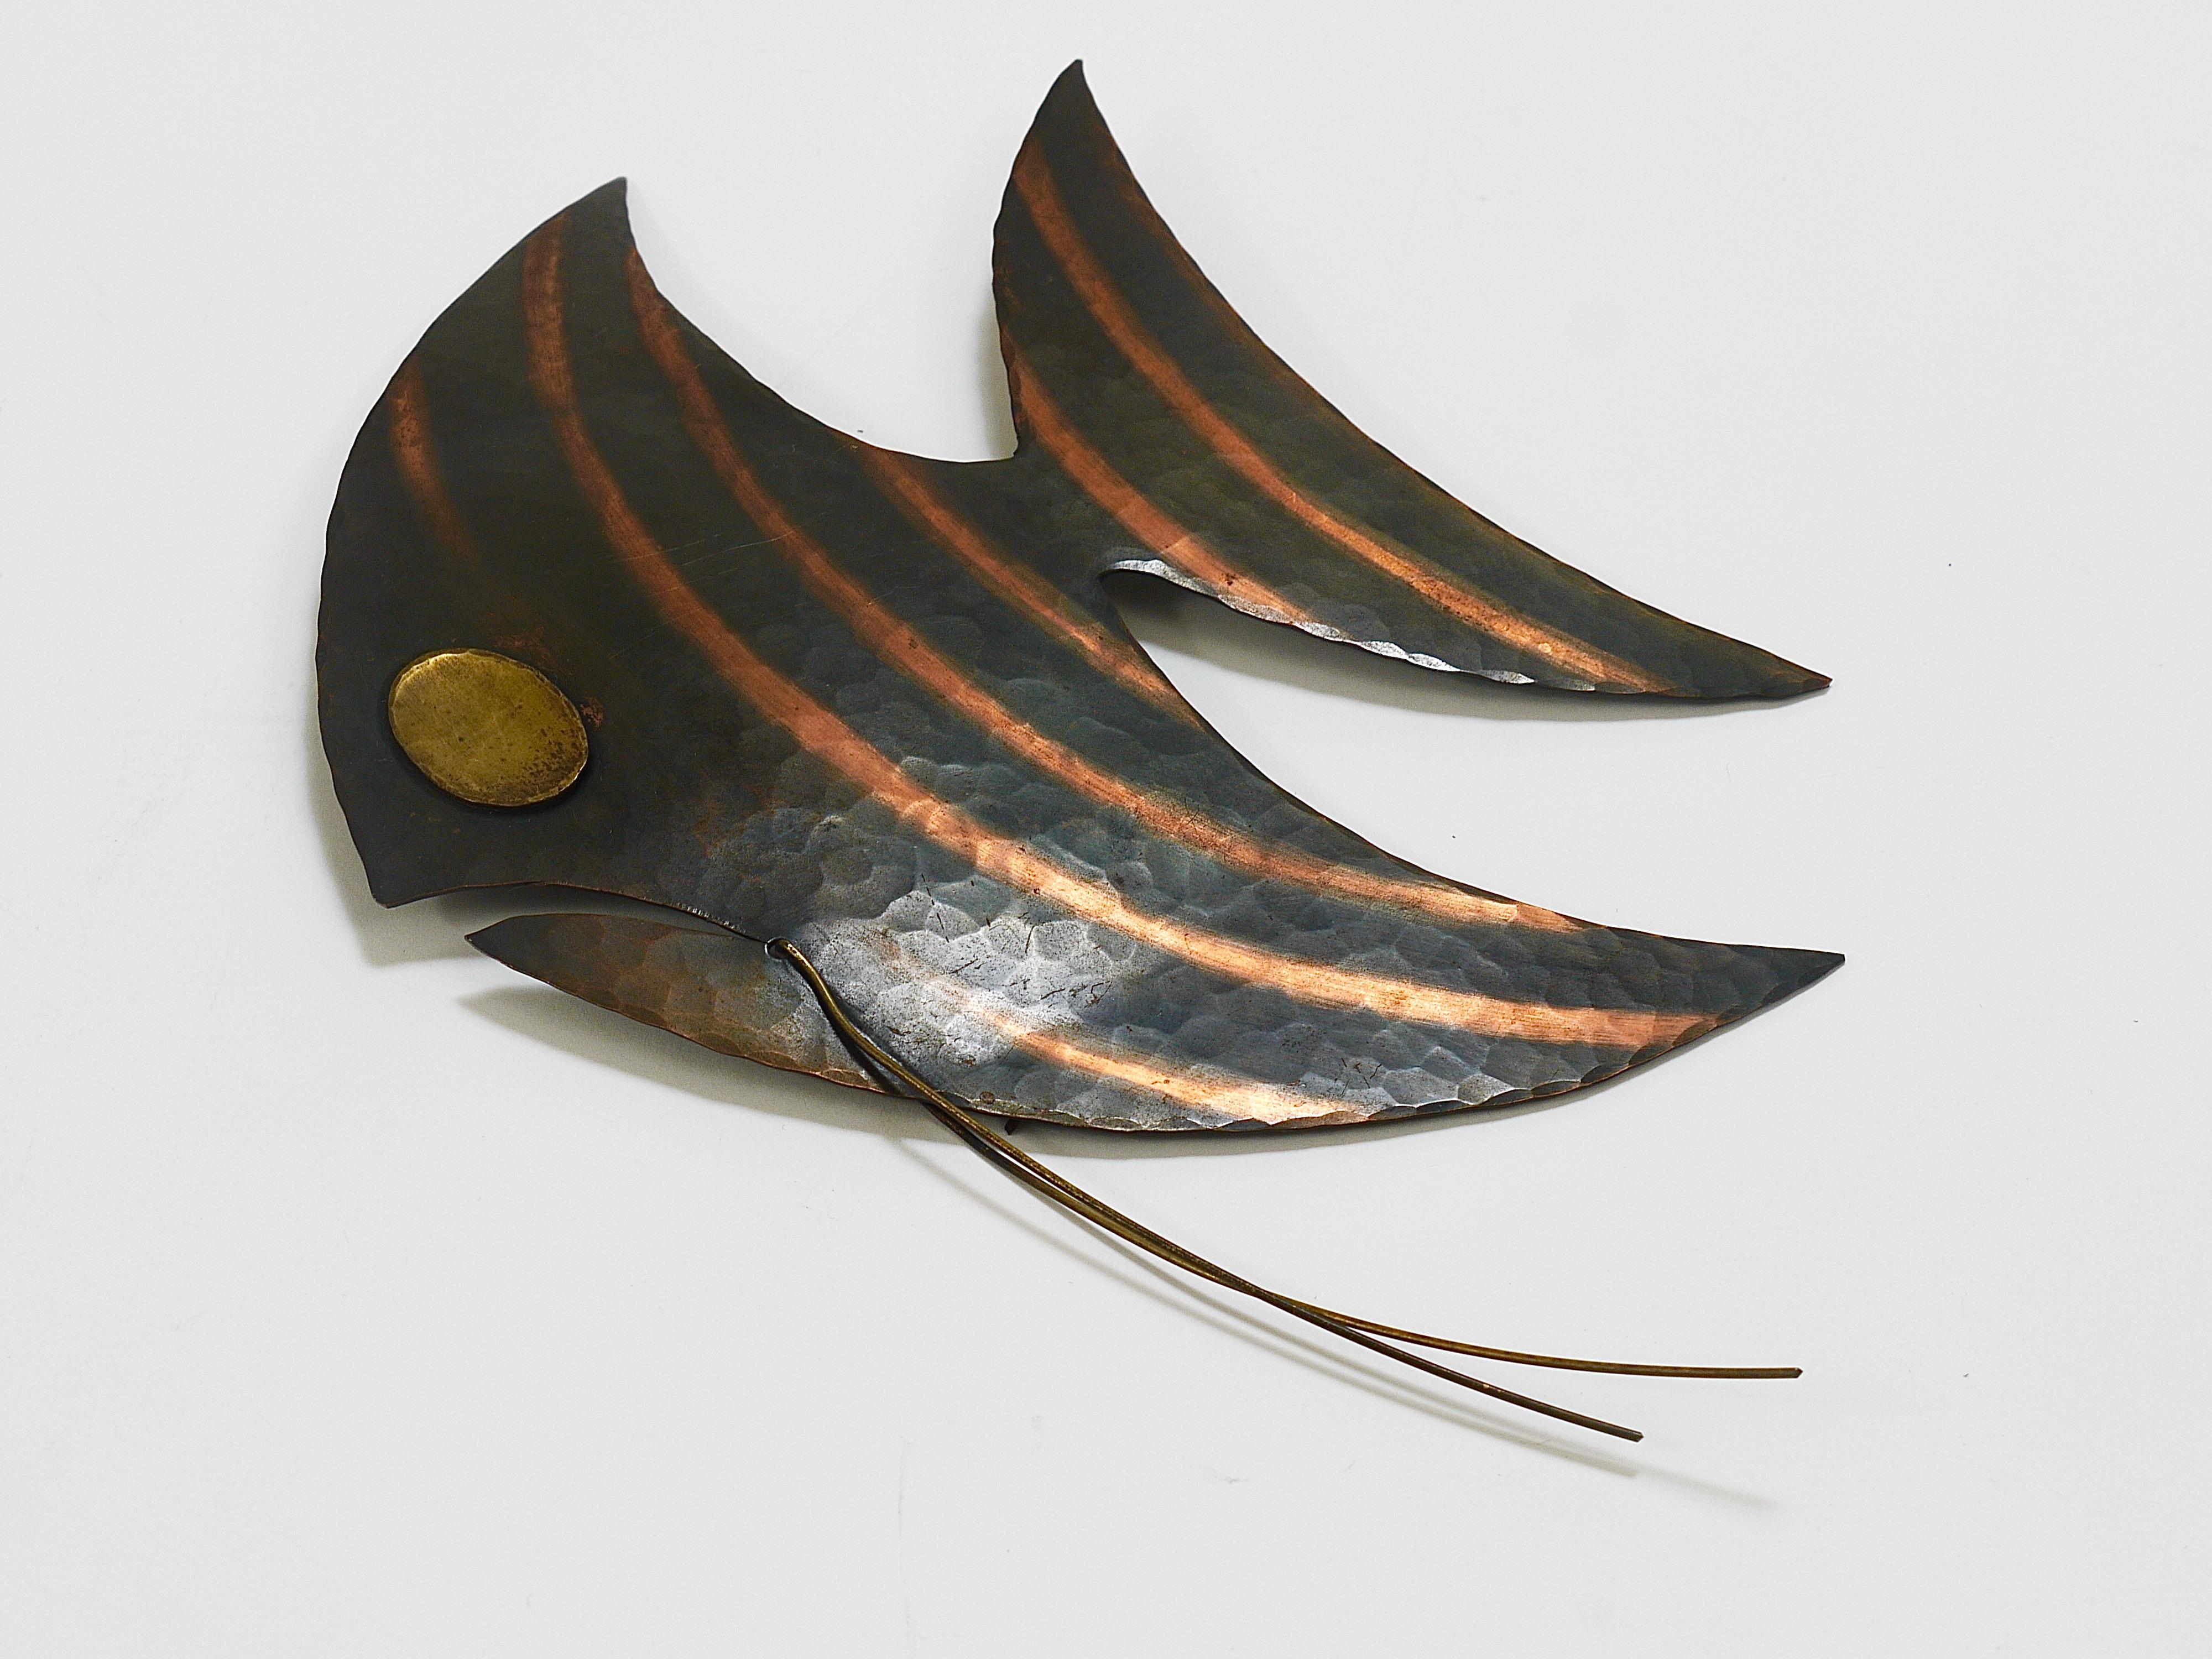 Midcentury Hammered Angel Fish Wall Plaque Sculpture, Copper, Austria, 1950s For Sale 3